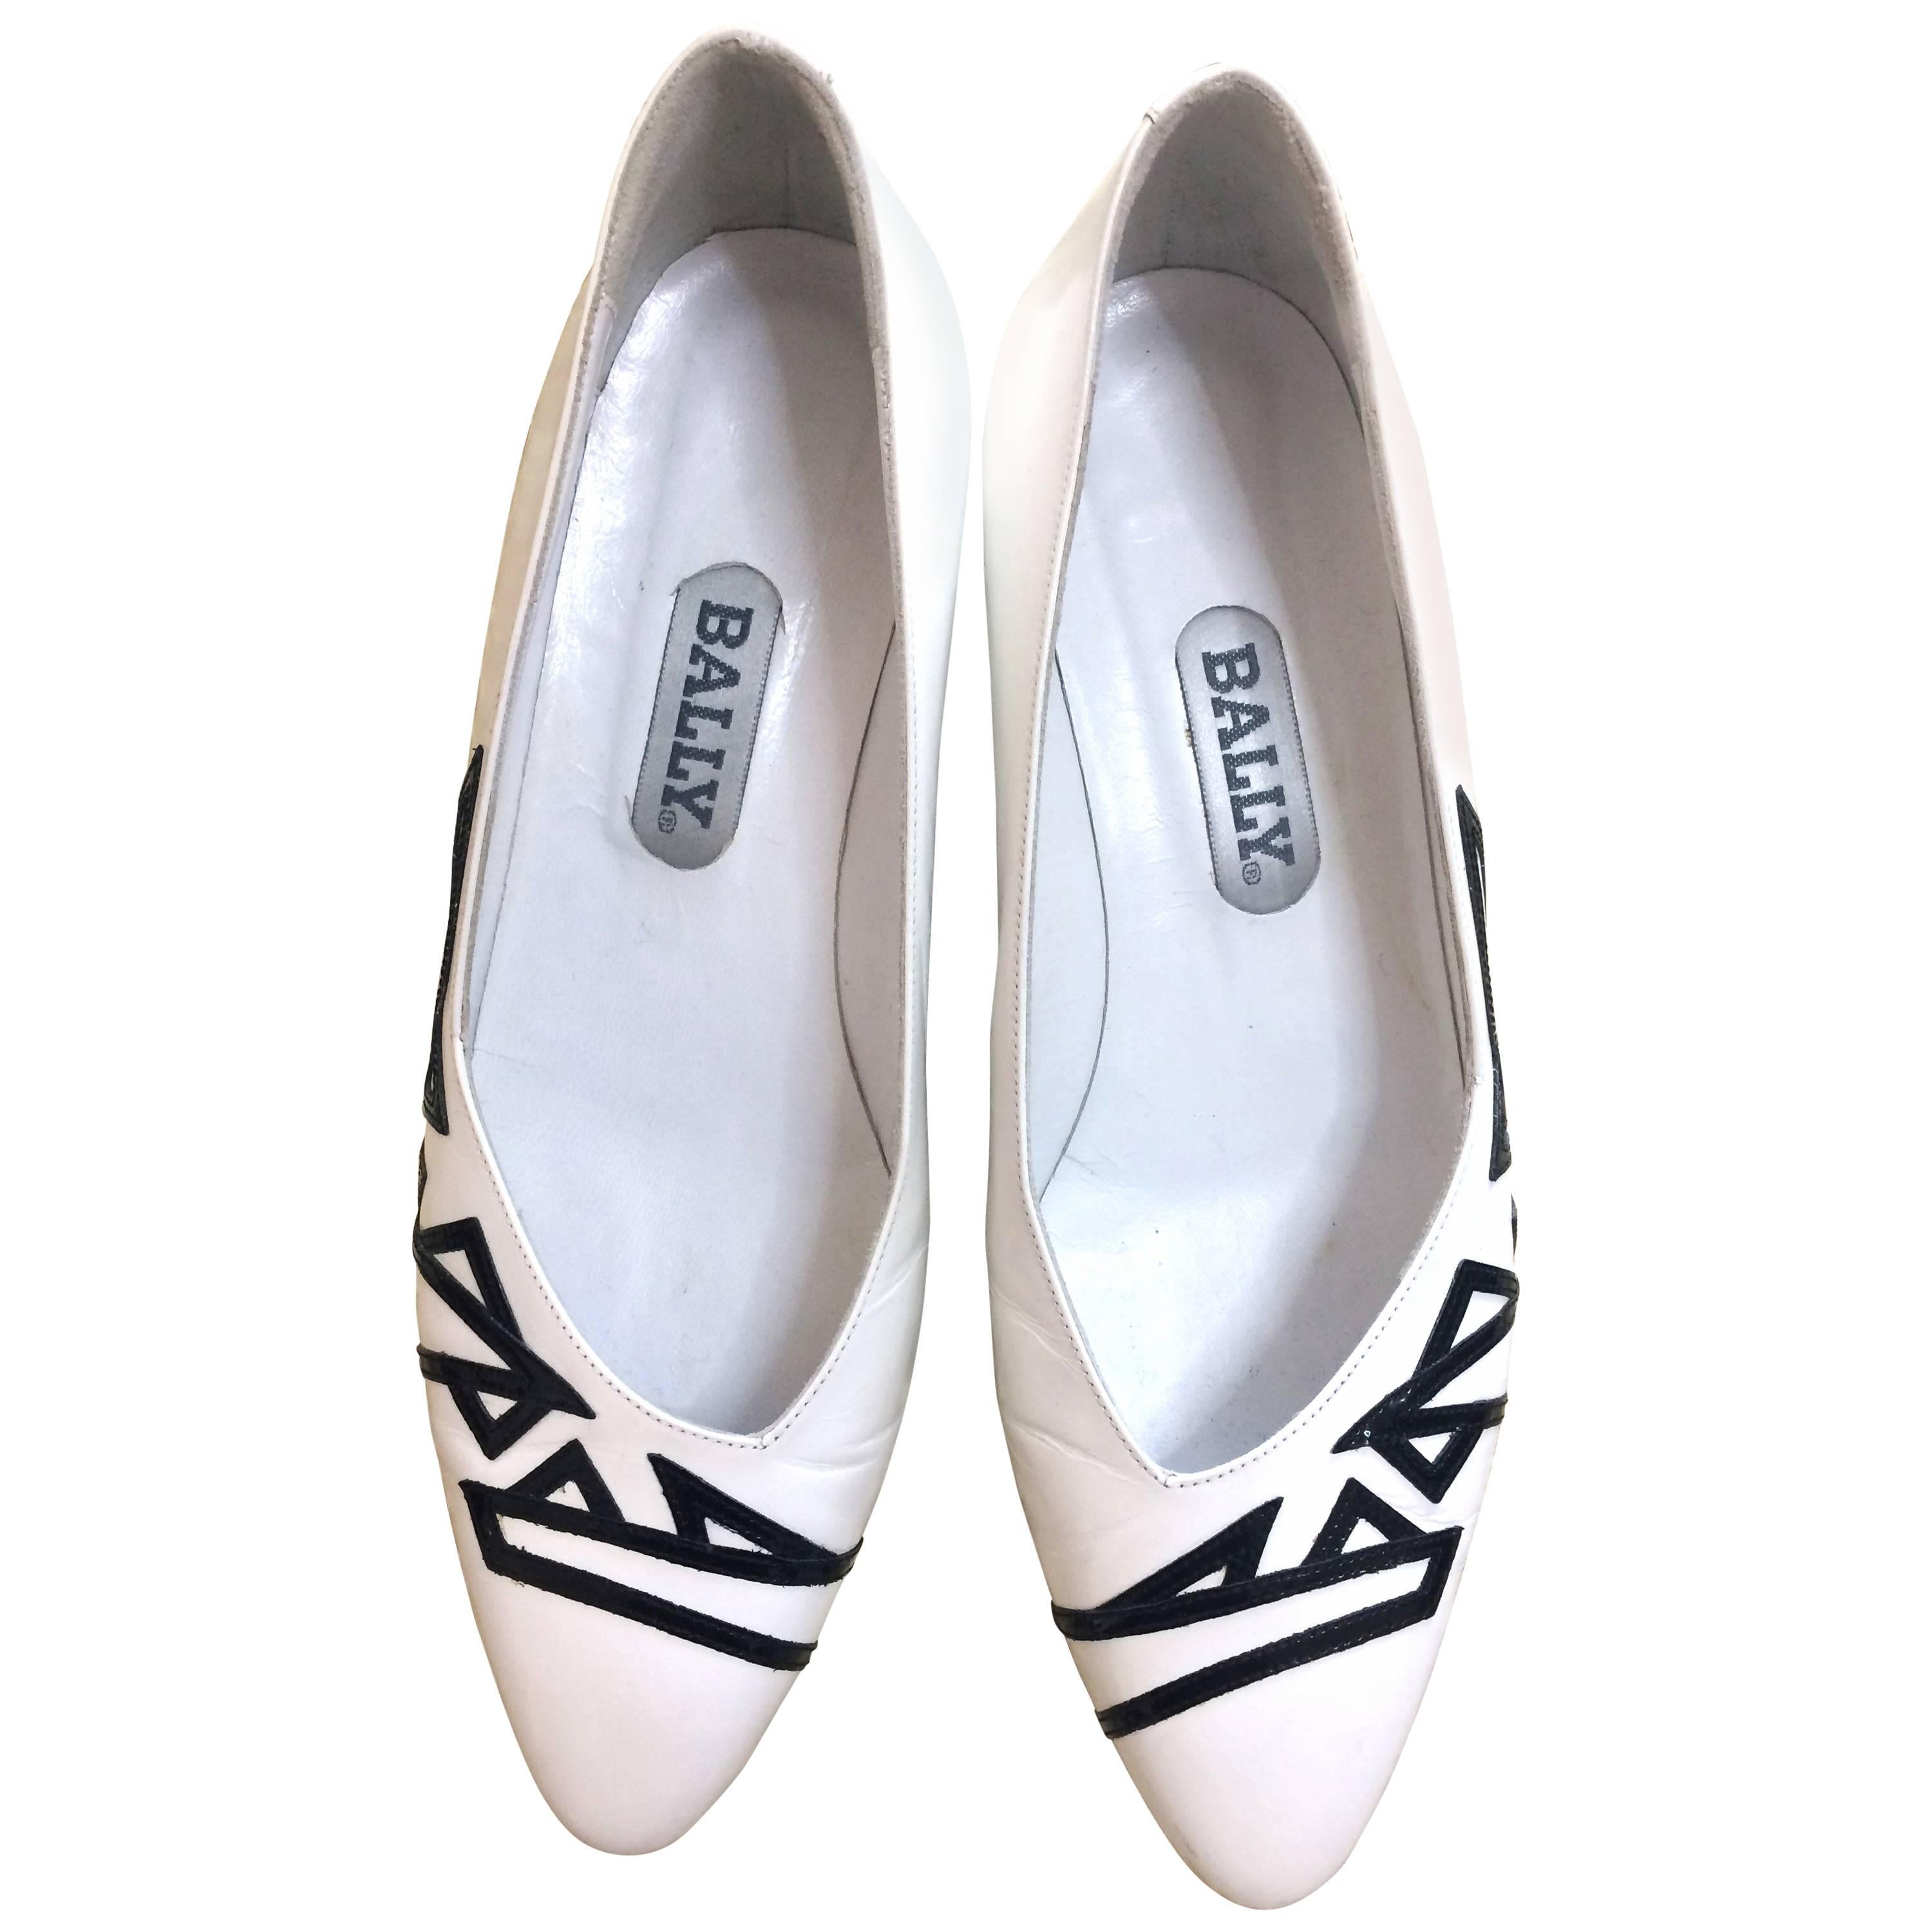 Vintage BALLY white and black leather flat shoes, pumps with geometric design.